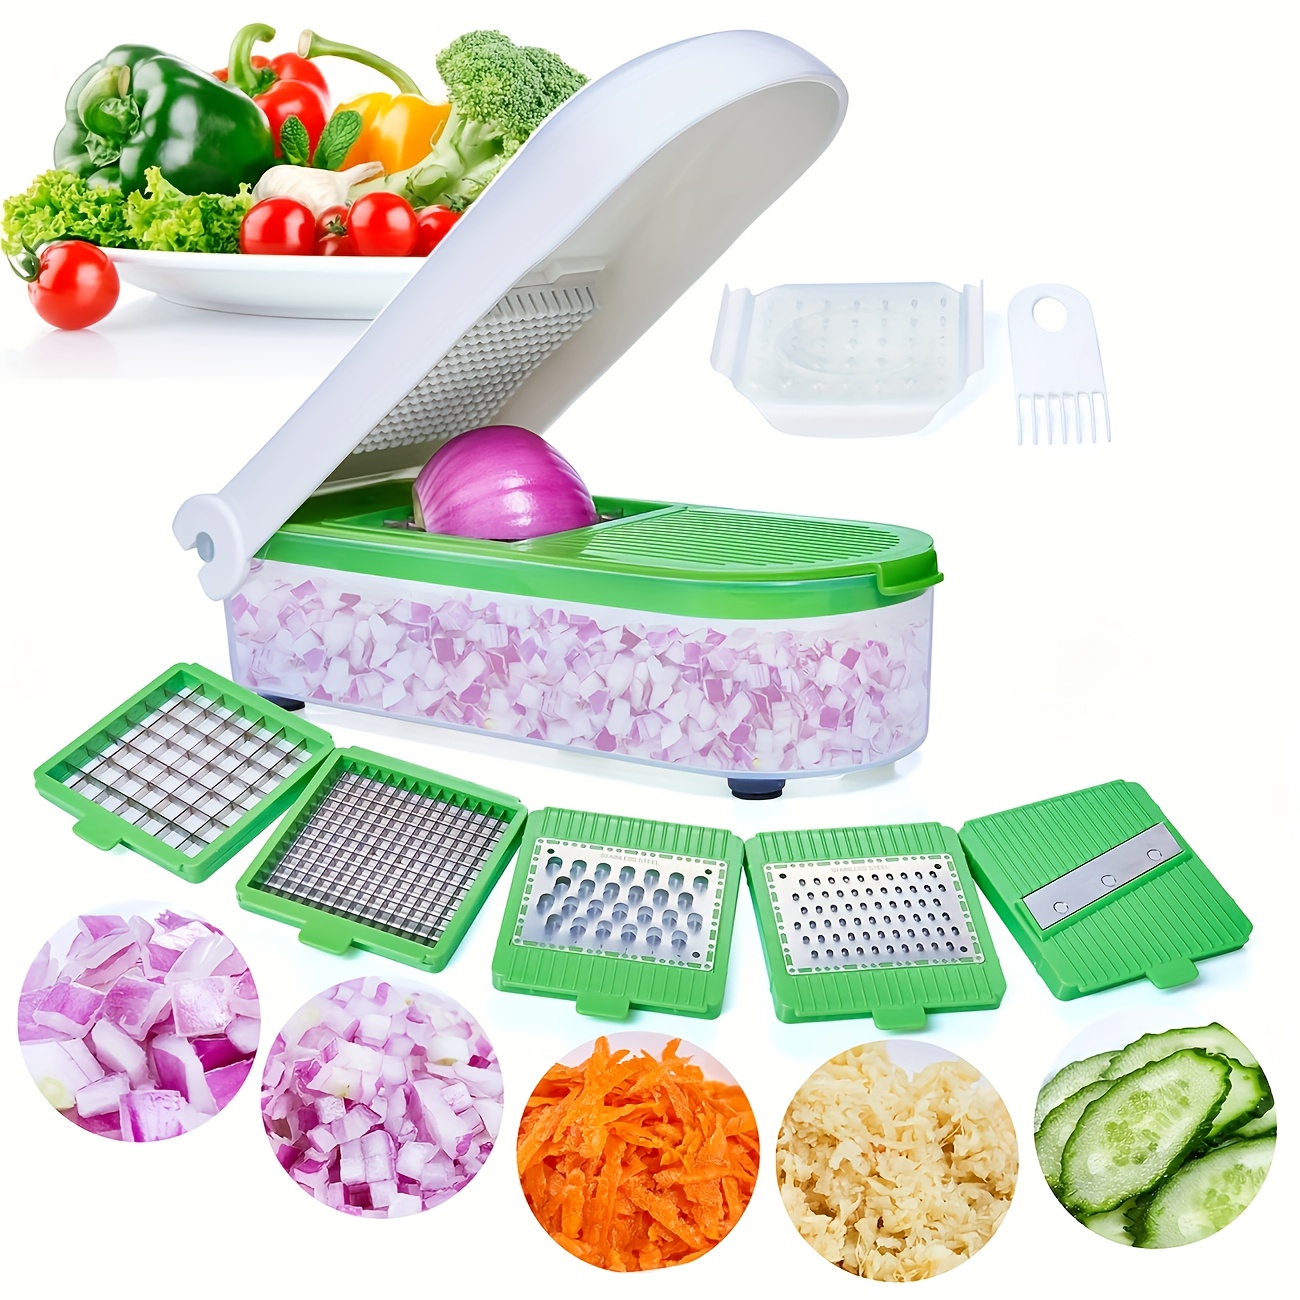 

Lhs Vegetable Chopper-multifunctional Onion Chopper Dicer Sala Potato Cutter Cheese Grater Vegetable Food Slicer With Container-5 Blades (green)